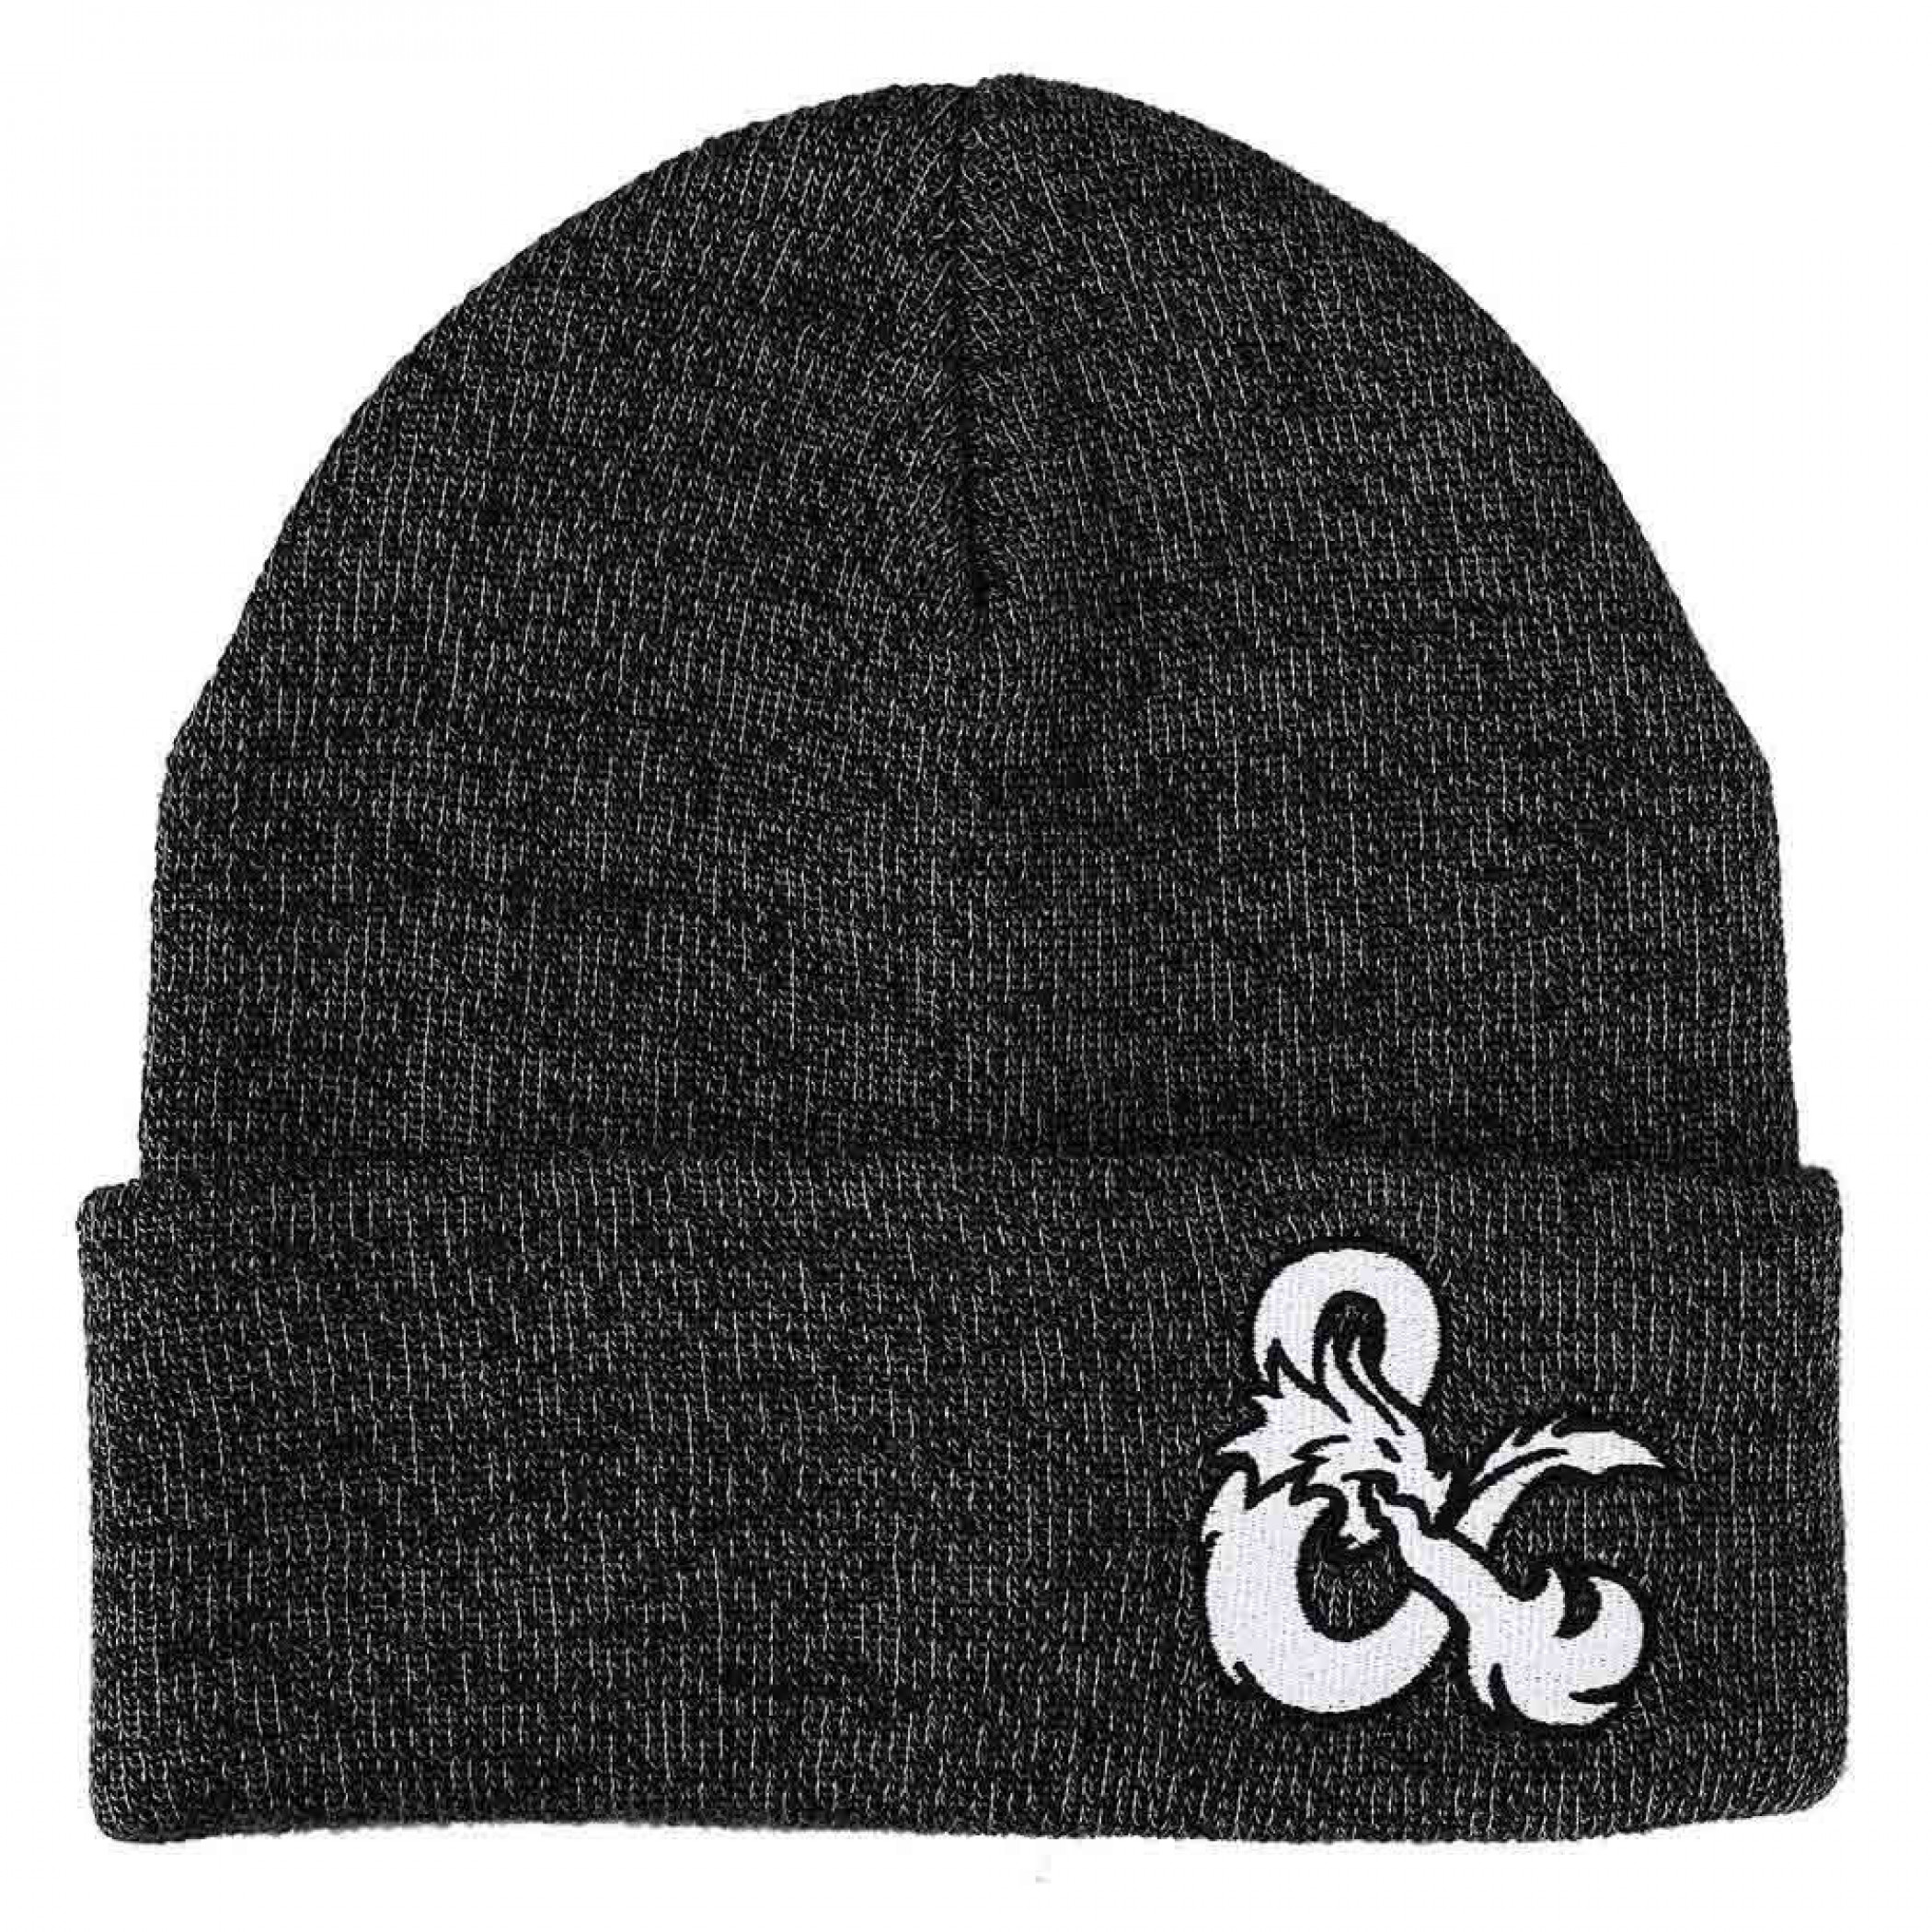 Dungeons & Dragons Embroidered Logo Cuff Beanie